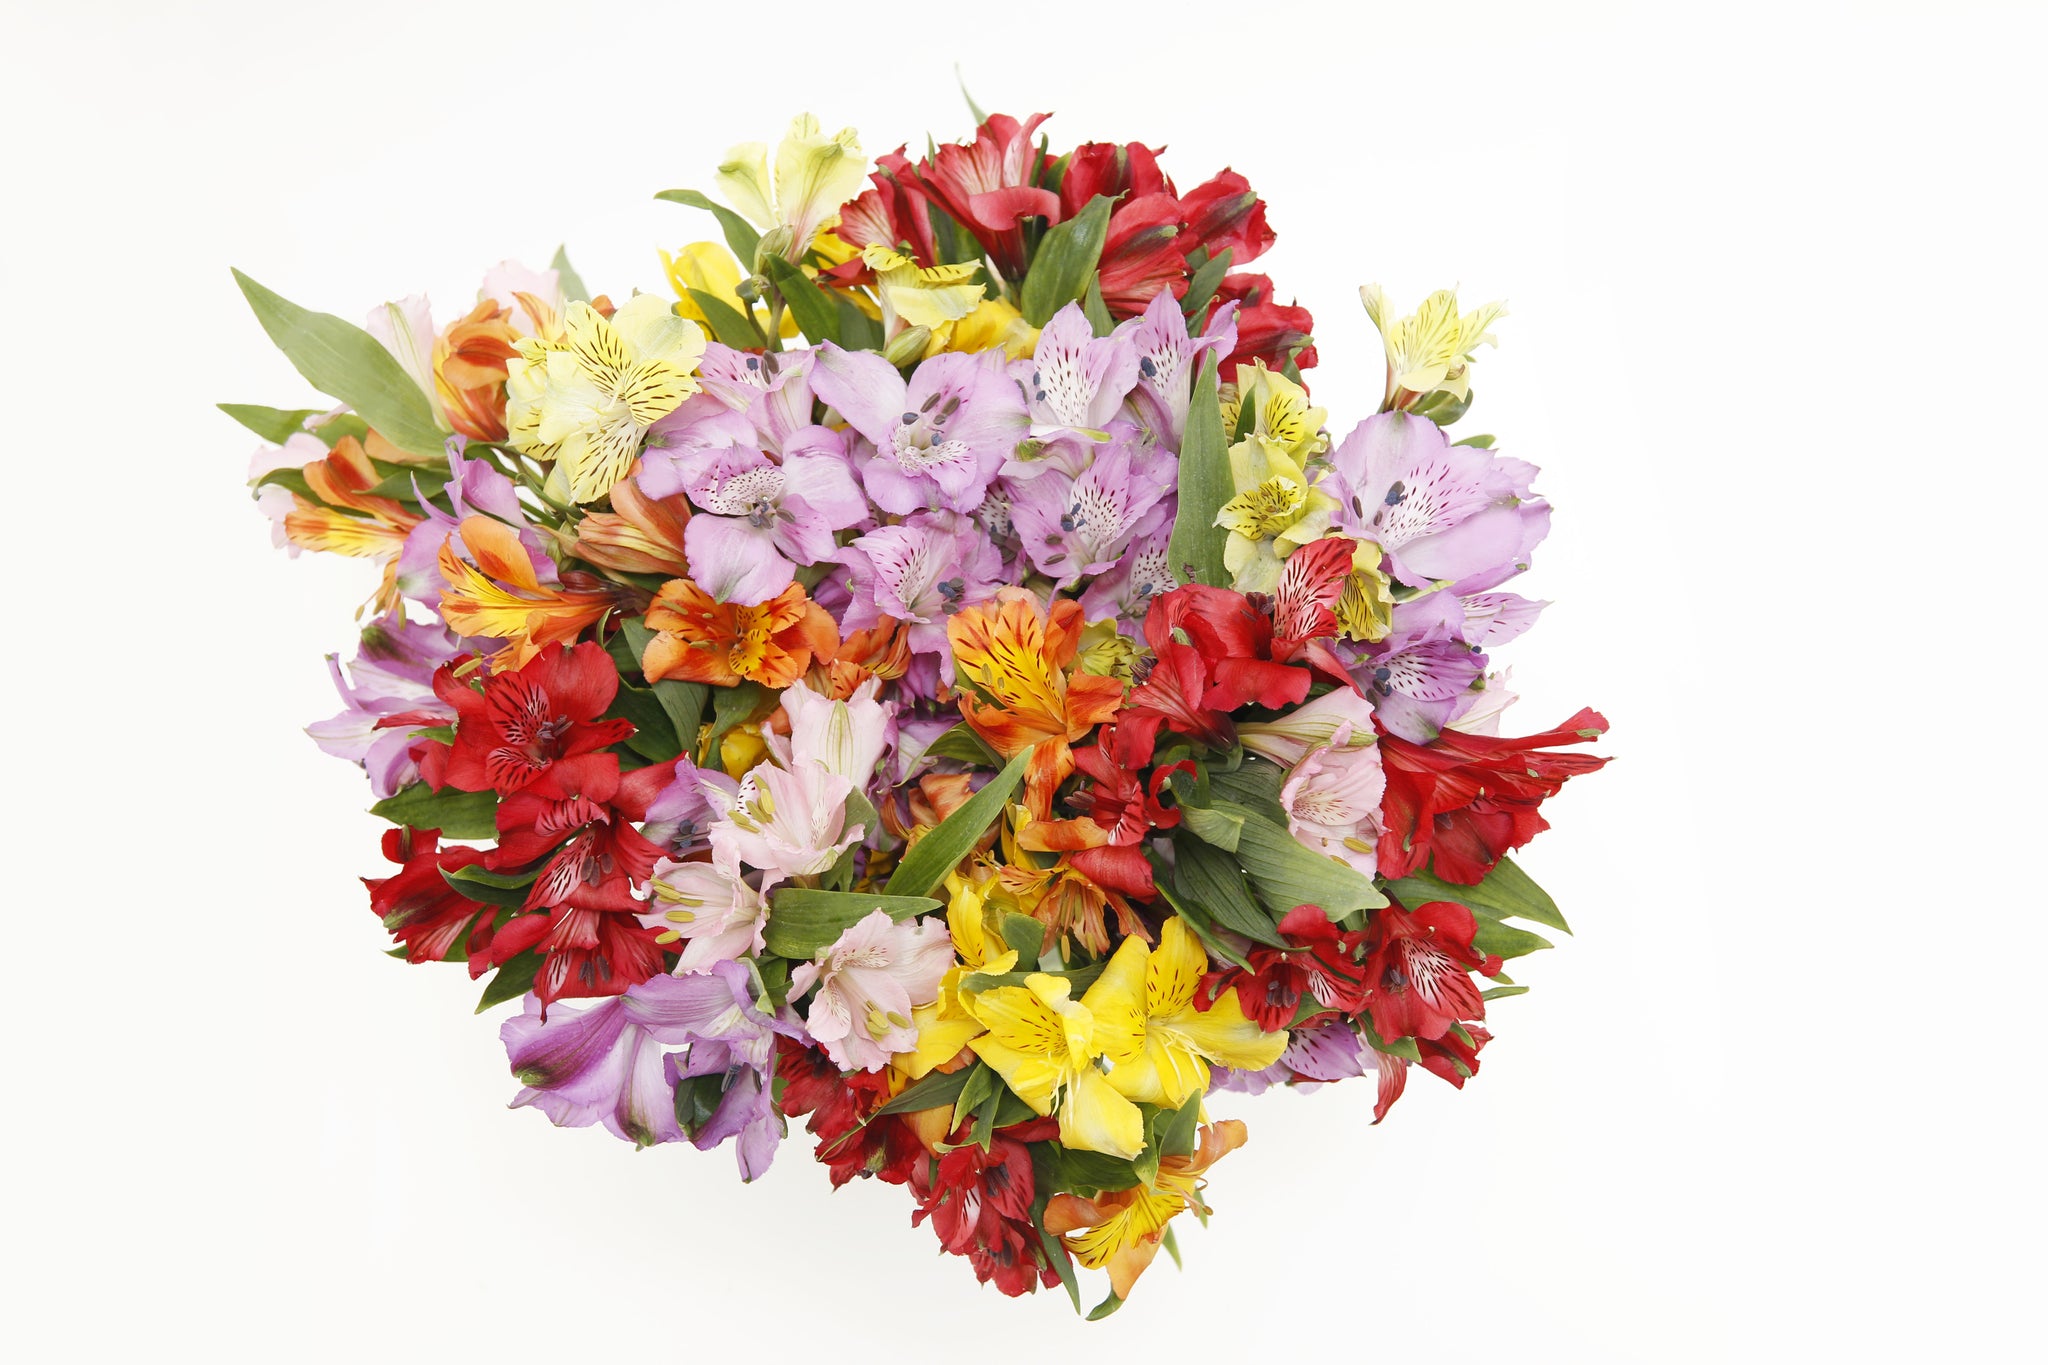 Rainbow’s Discovery Peruvian Lily Bouquet Top- Vase of Assorted Alstroemerias - Peruvian Lilies